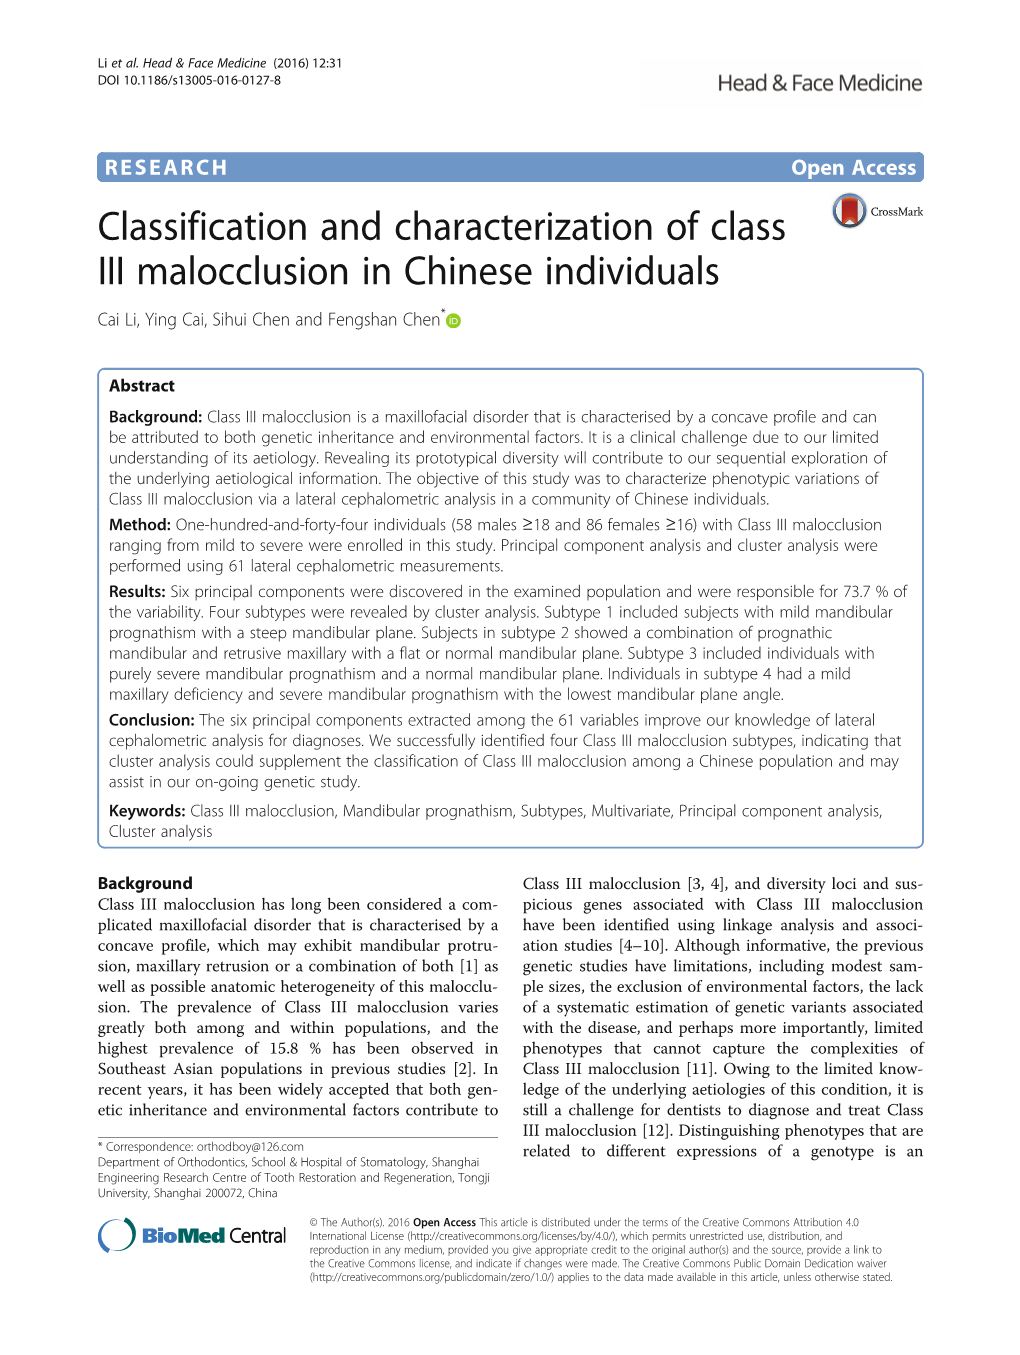 Classification and Characterization of Class III Malocclusion in Chinese Individuals Cai Li, Ying Cai, Sihui Chen and Fengshan Chen*